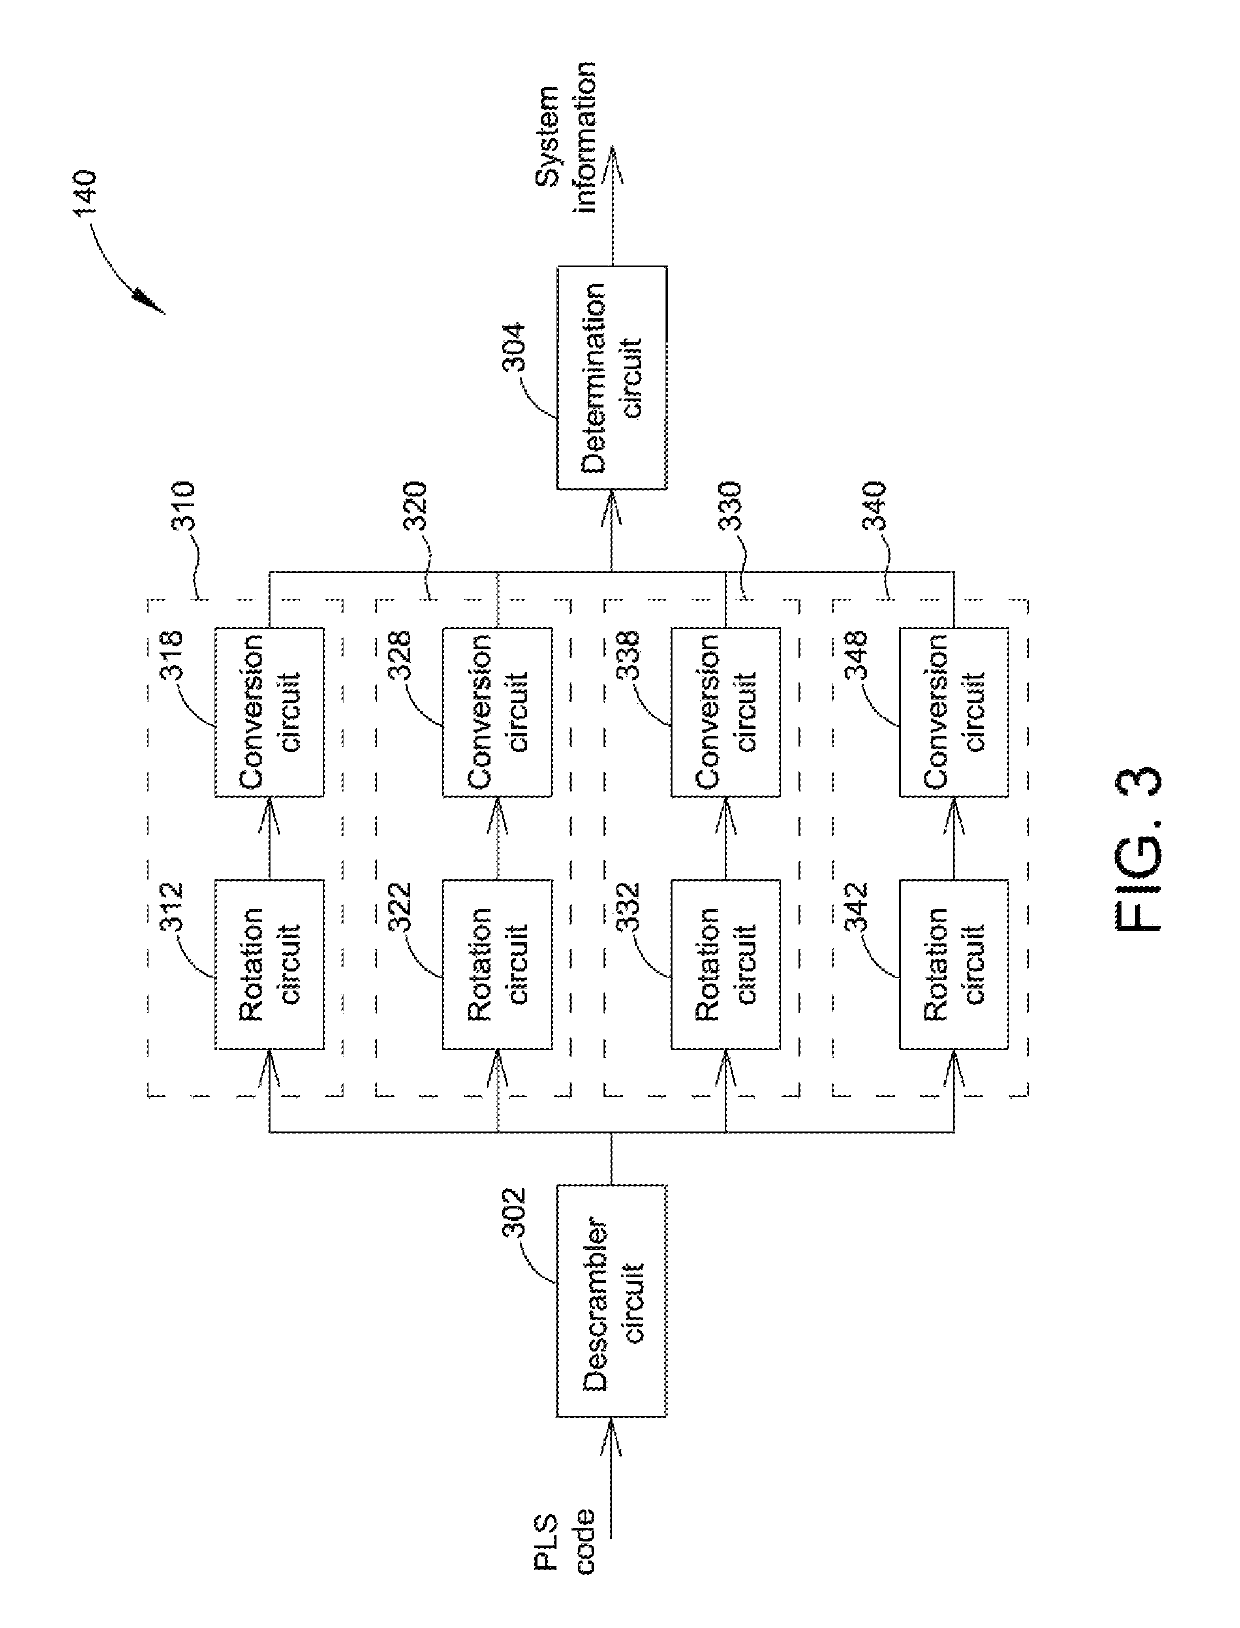 Decoding circuit applied to multimedia apparatus and associated decoding method